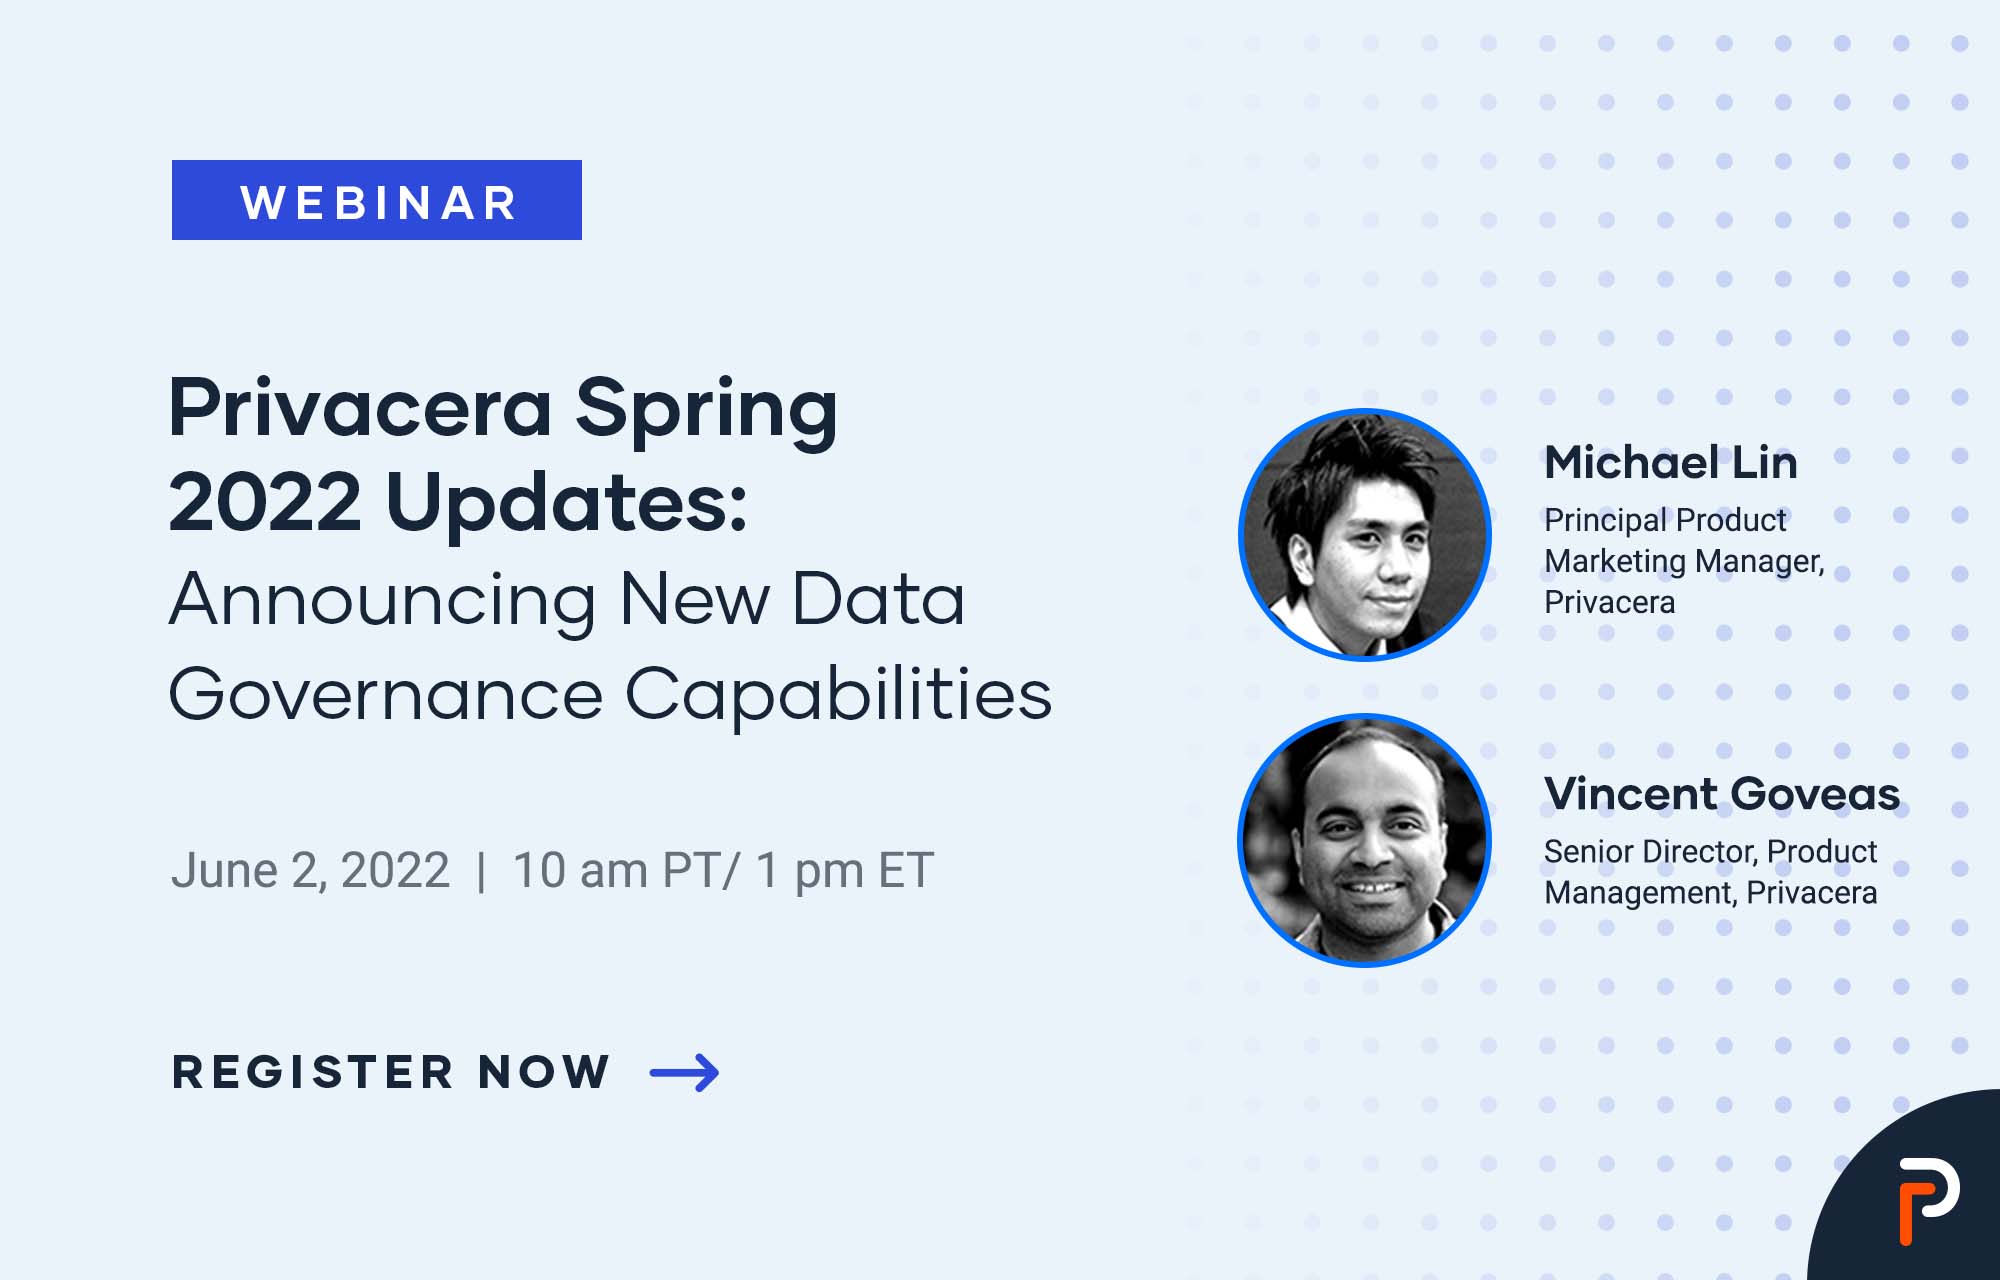 Privacera Spring 2022 Updates: Announcing New Data Governance Capabilities